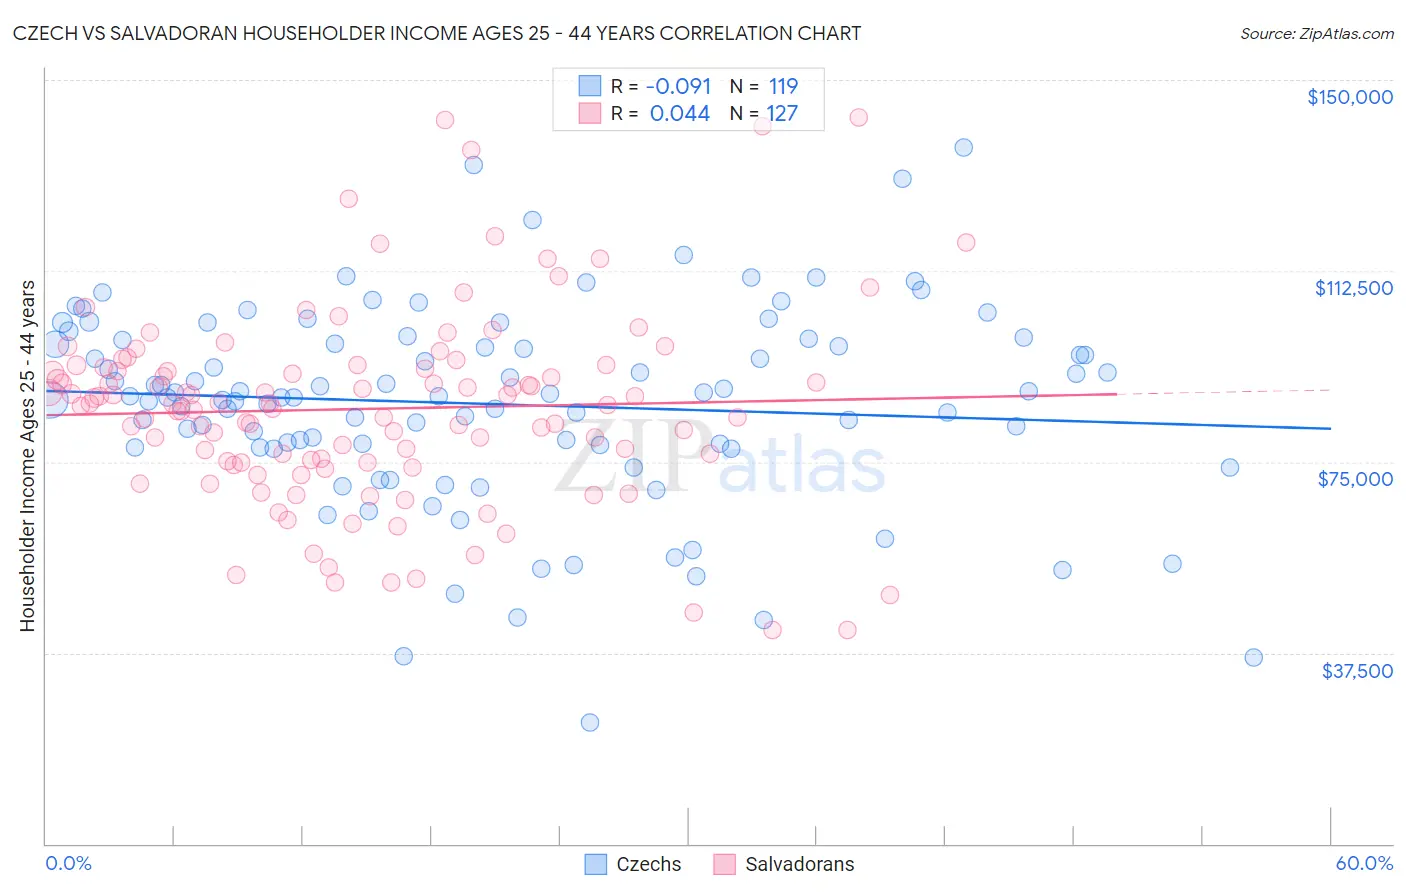 Czech vs Salvadoran Householder Income Ages 25 - 44 years